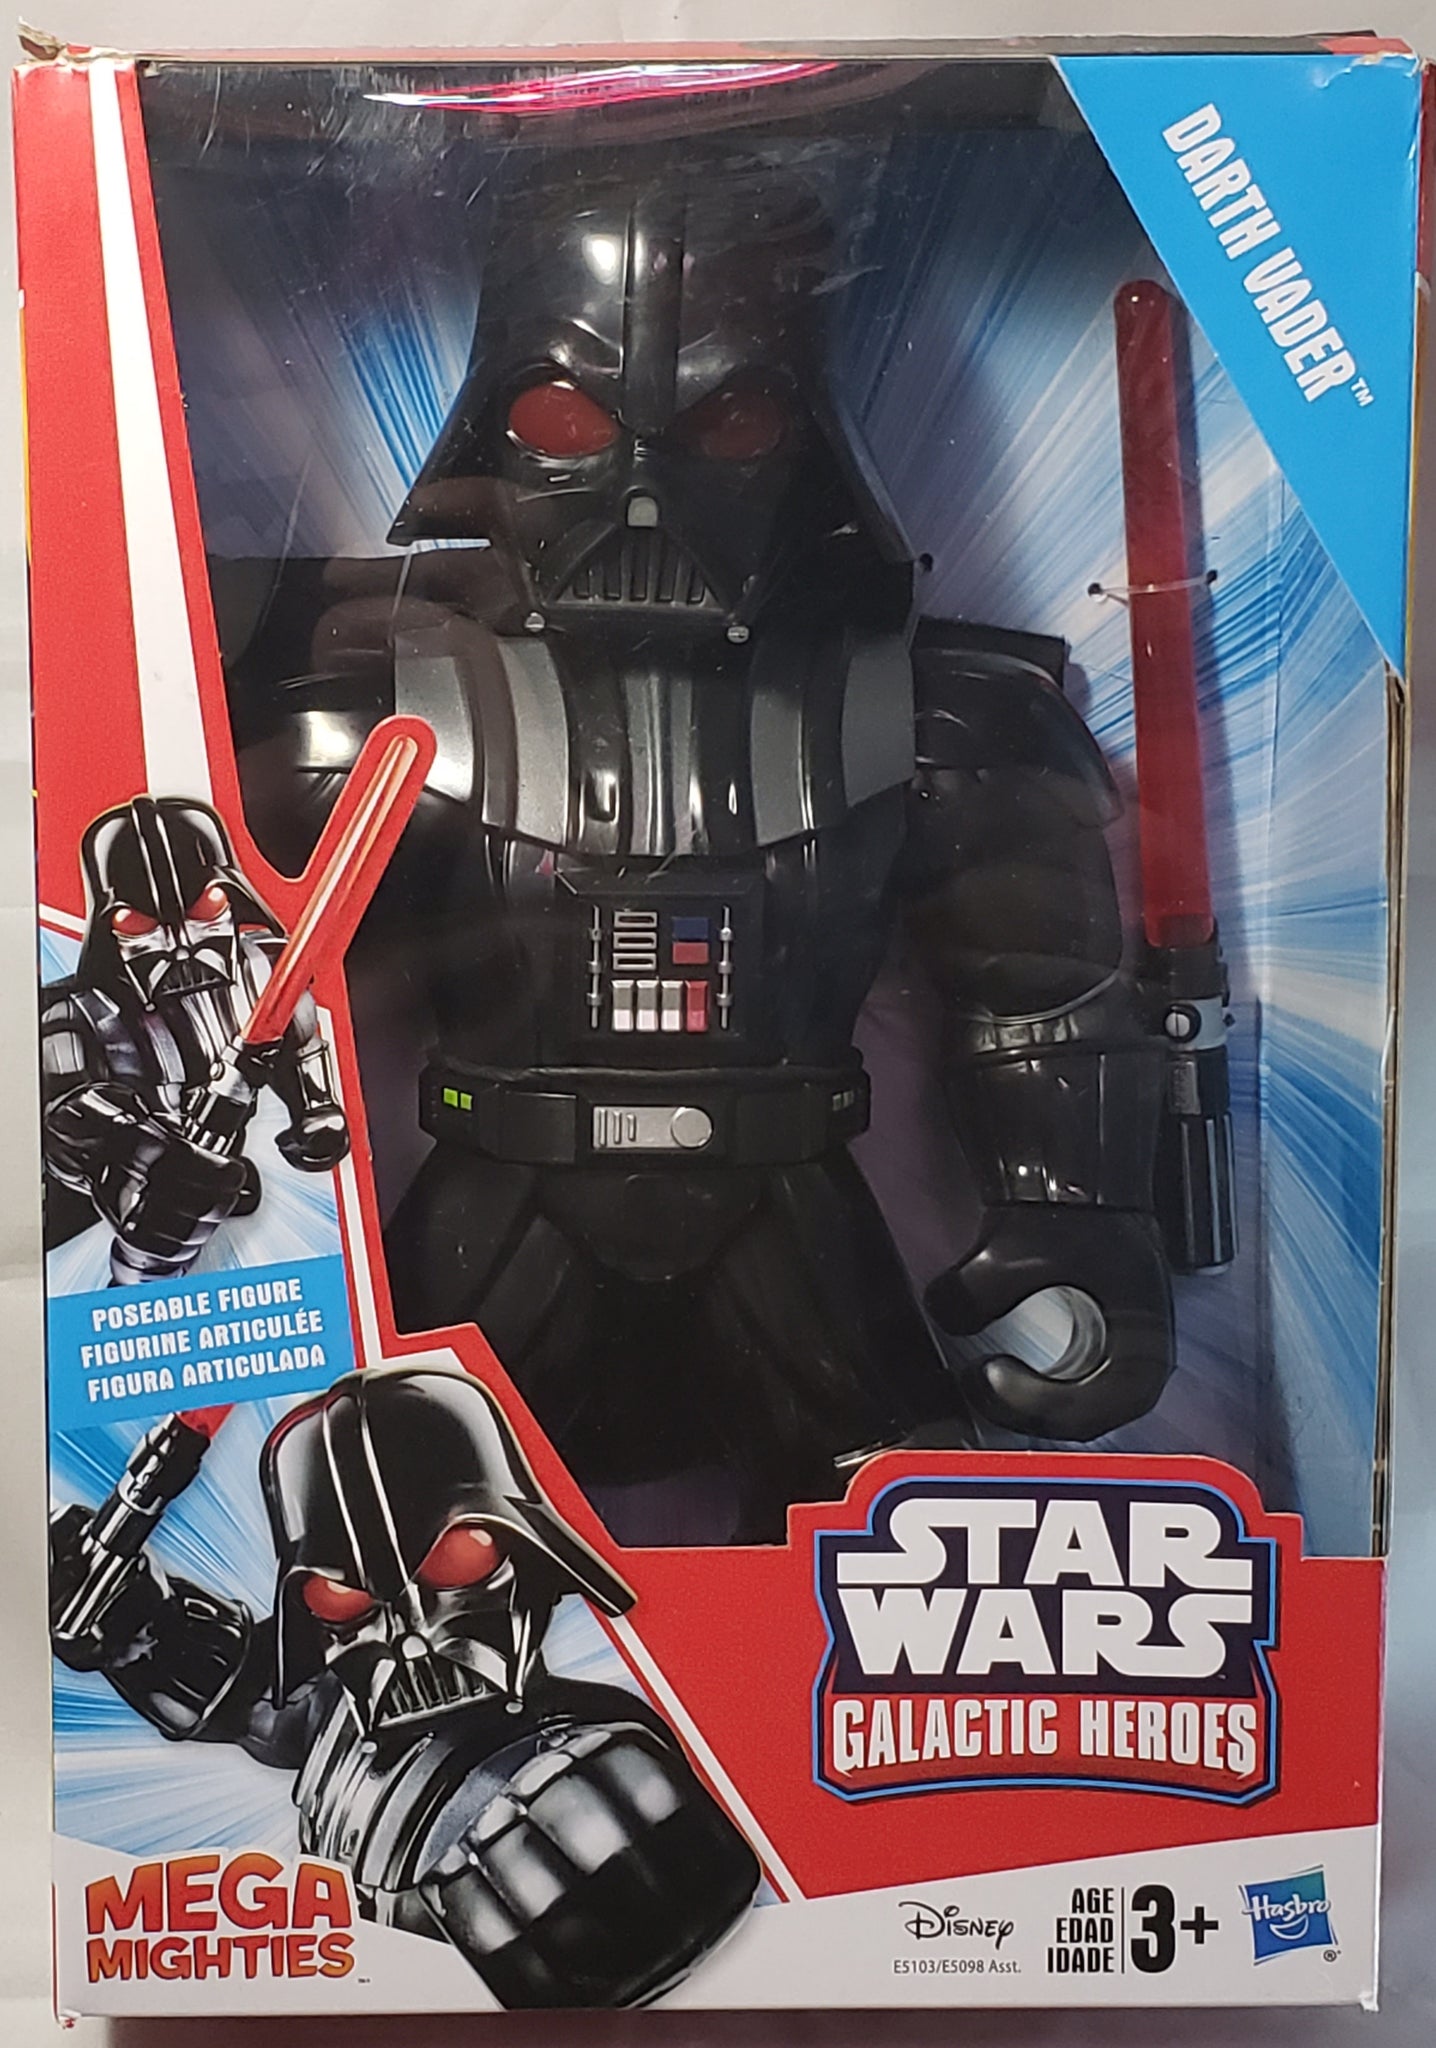 Star Wars The Vintage Collection Darth Vader (The Dark Times) Toy,  3.75-Inch-Scale Star Wars: OBI-Wan Kenobi Figure, Toys Kids Ages 4 and Up,  Figures -  Canada